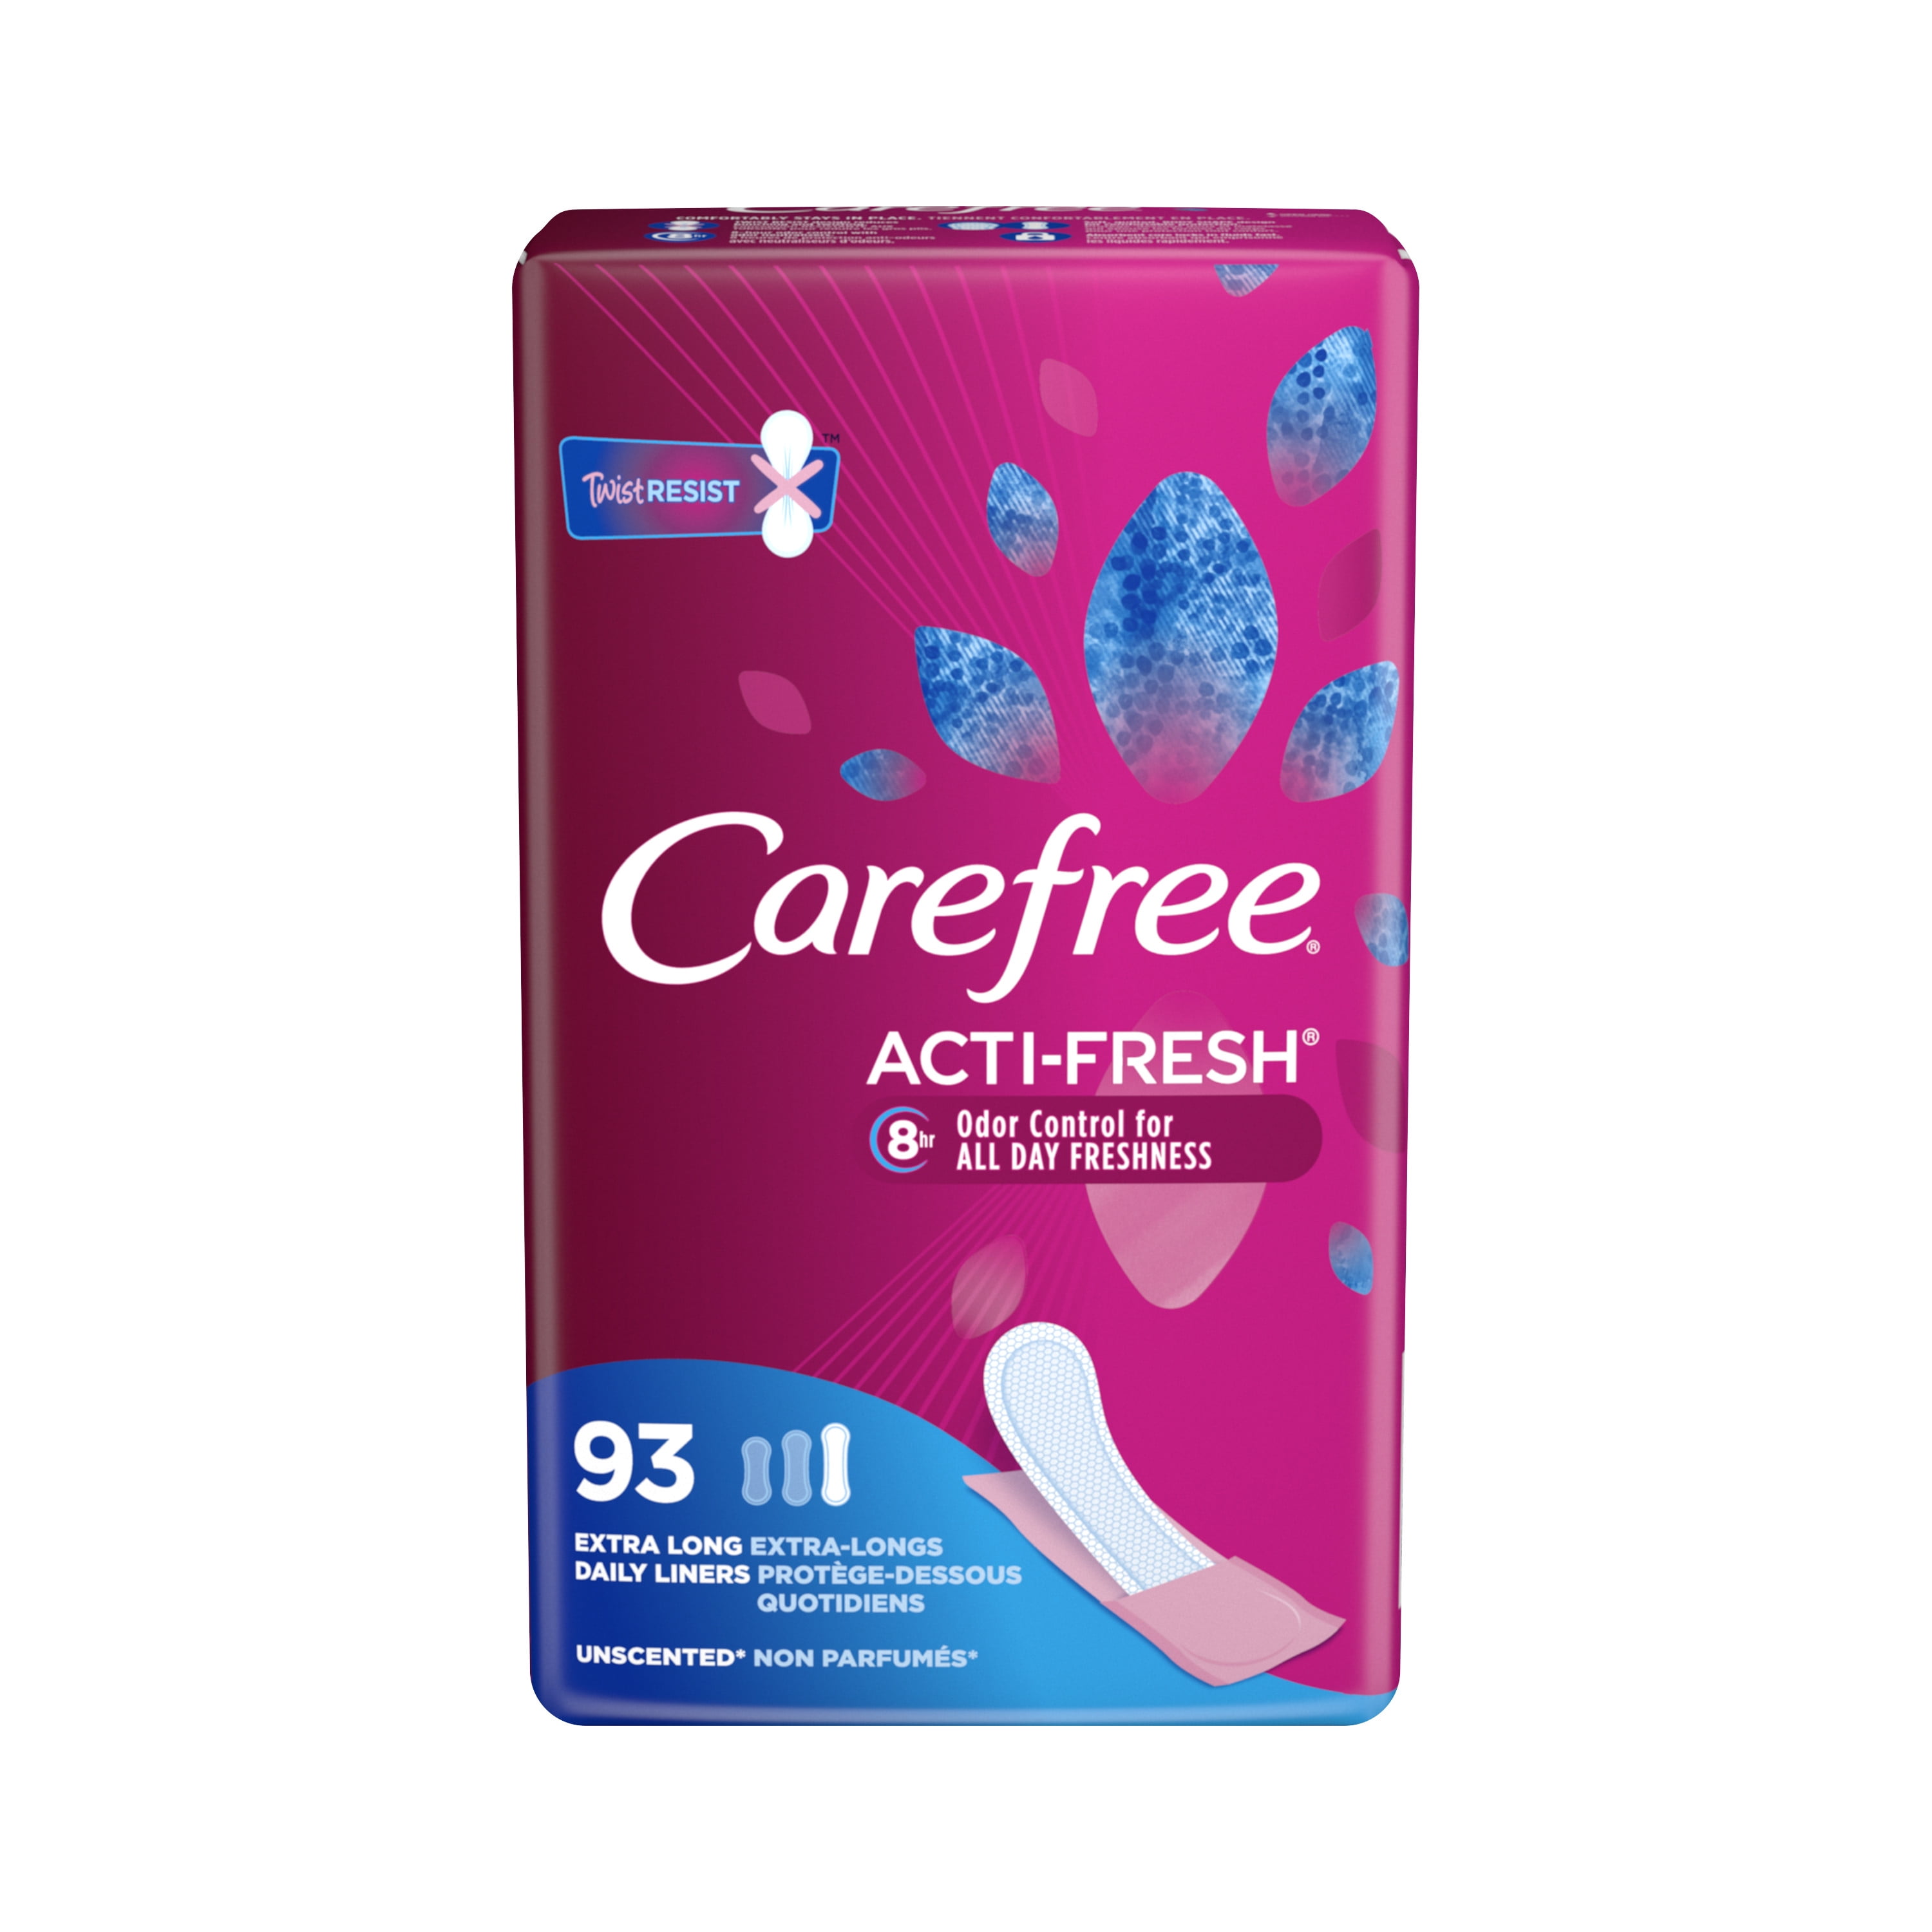 Carefree ACTI-FRESH Extra Long Unscented Daily Panty Liners, 93 Ct, 8 Hour Odor Control With Odor Neutralizers